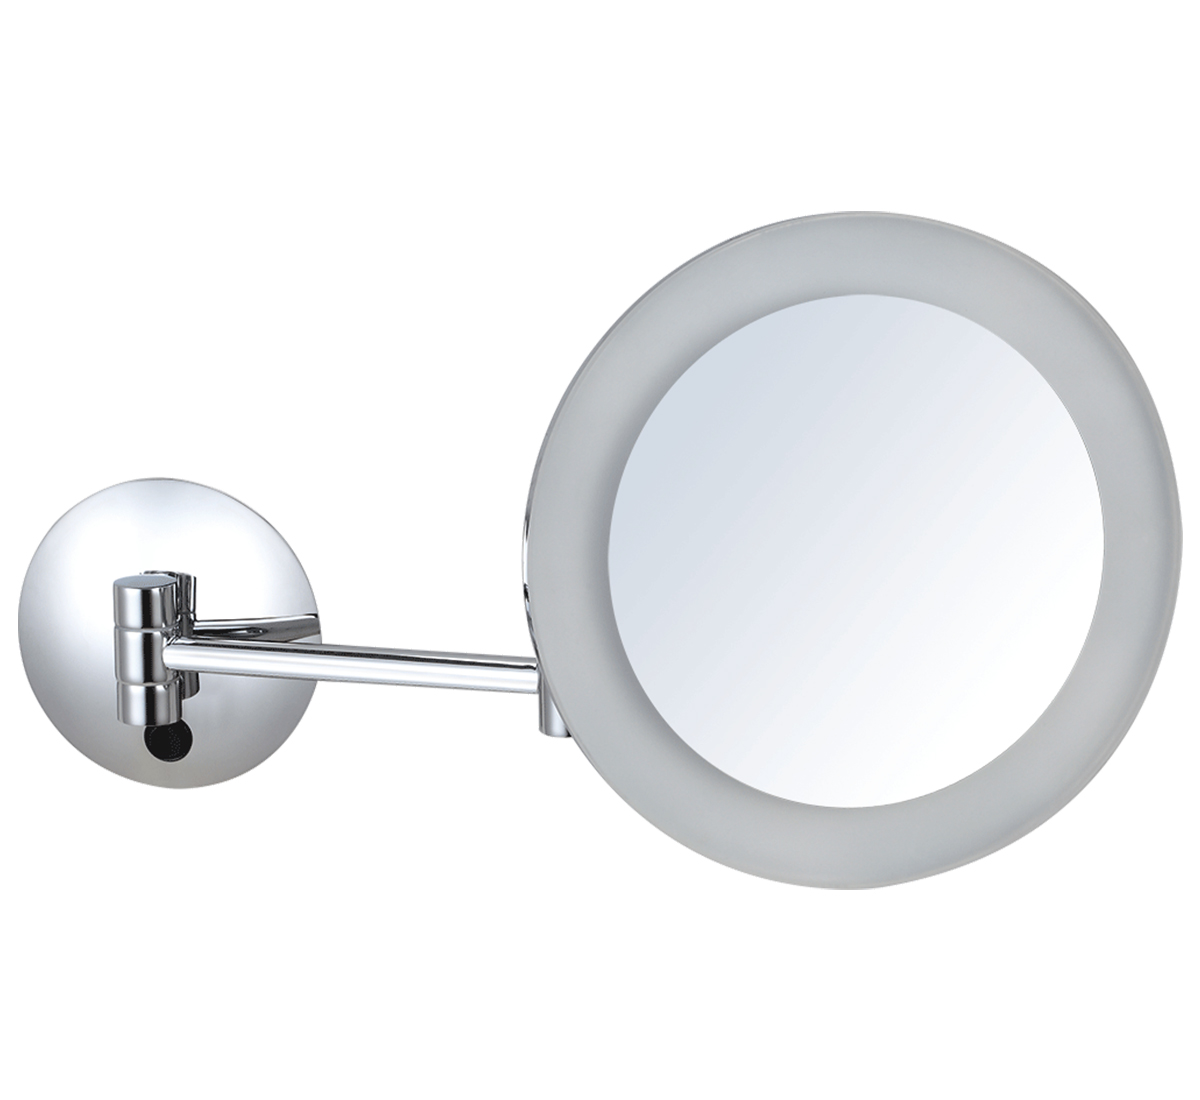 Acrylics 3X Round Wall Mounted Mirror
